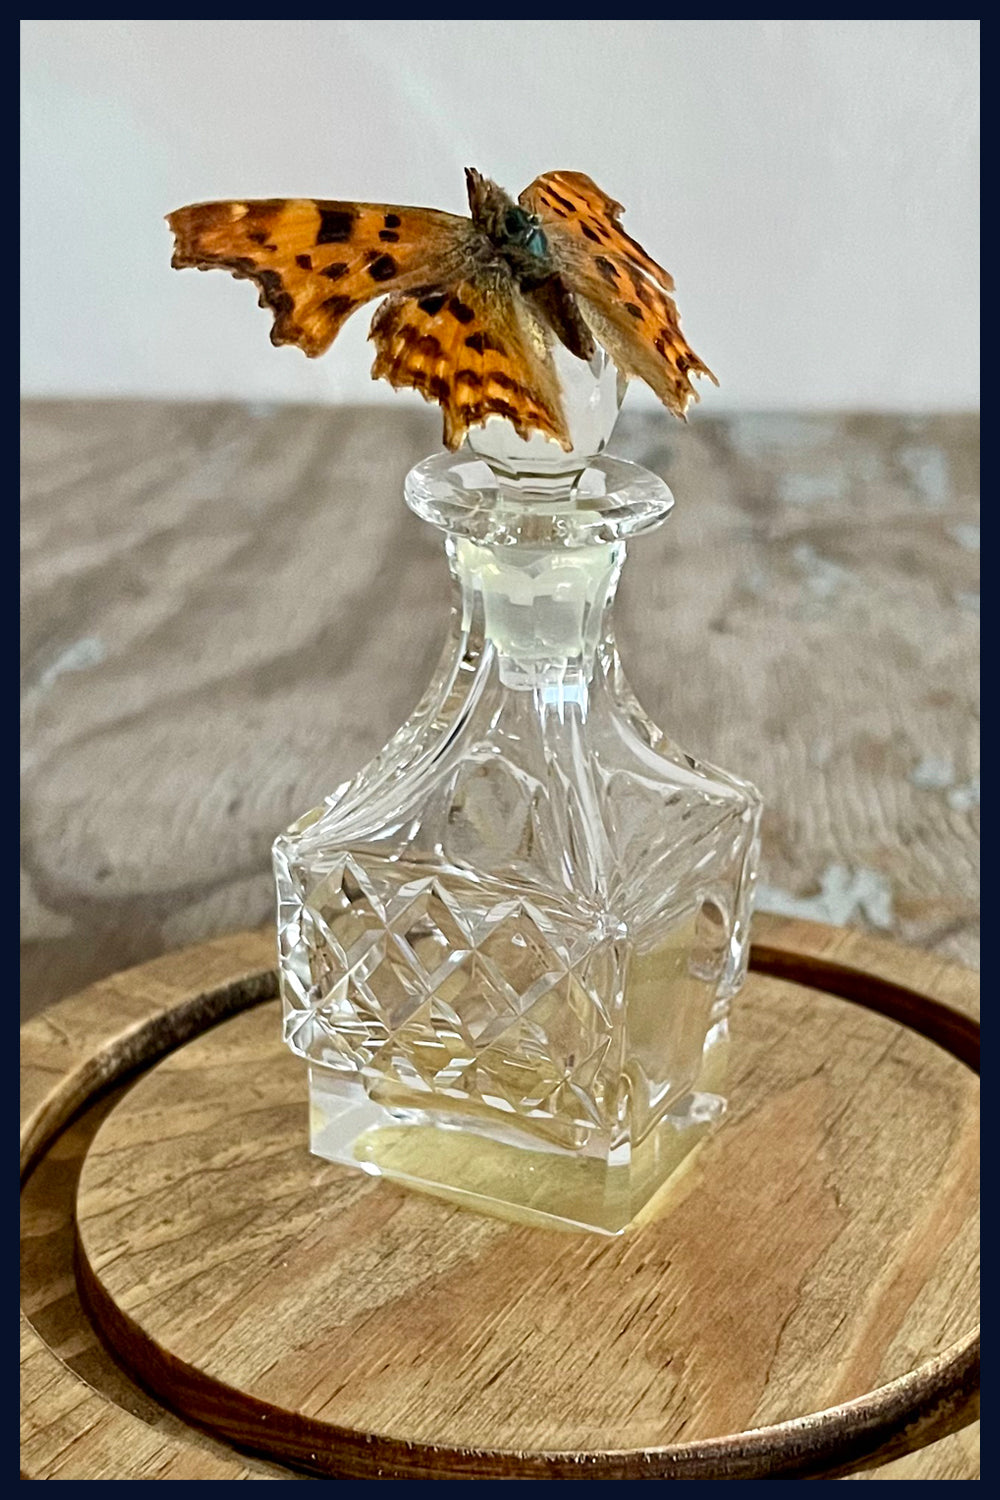 Enigma Variations Collection: Vintage Cut-Crystal Bottle with a Vintage Butterfly in a Glass Display Dome